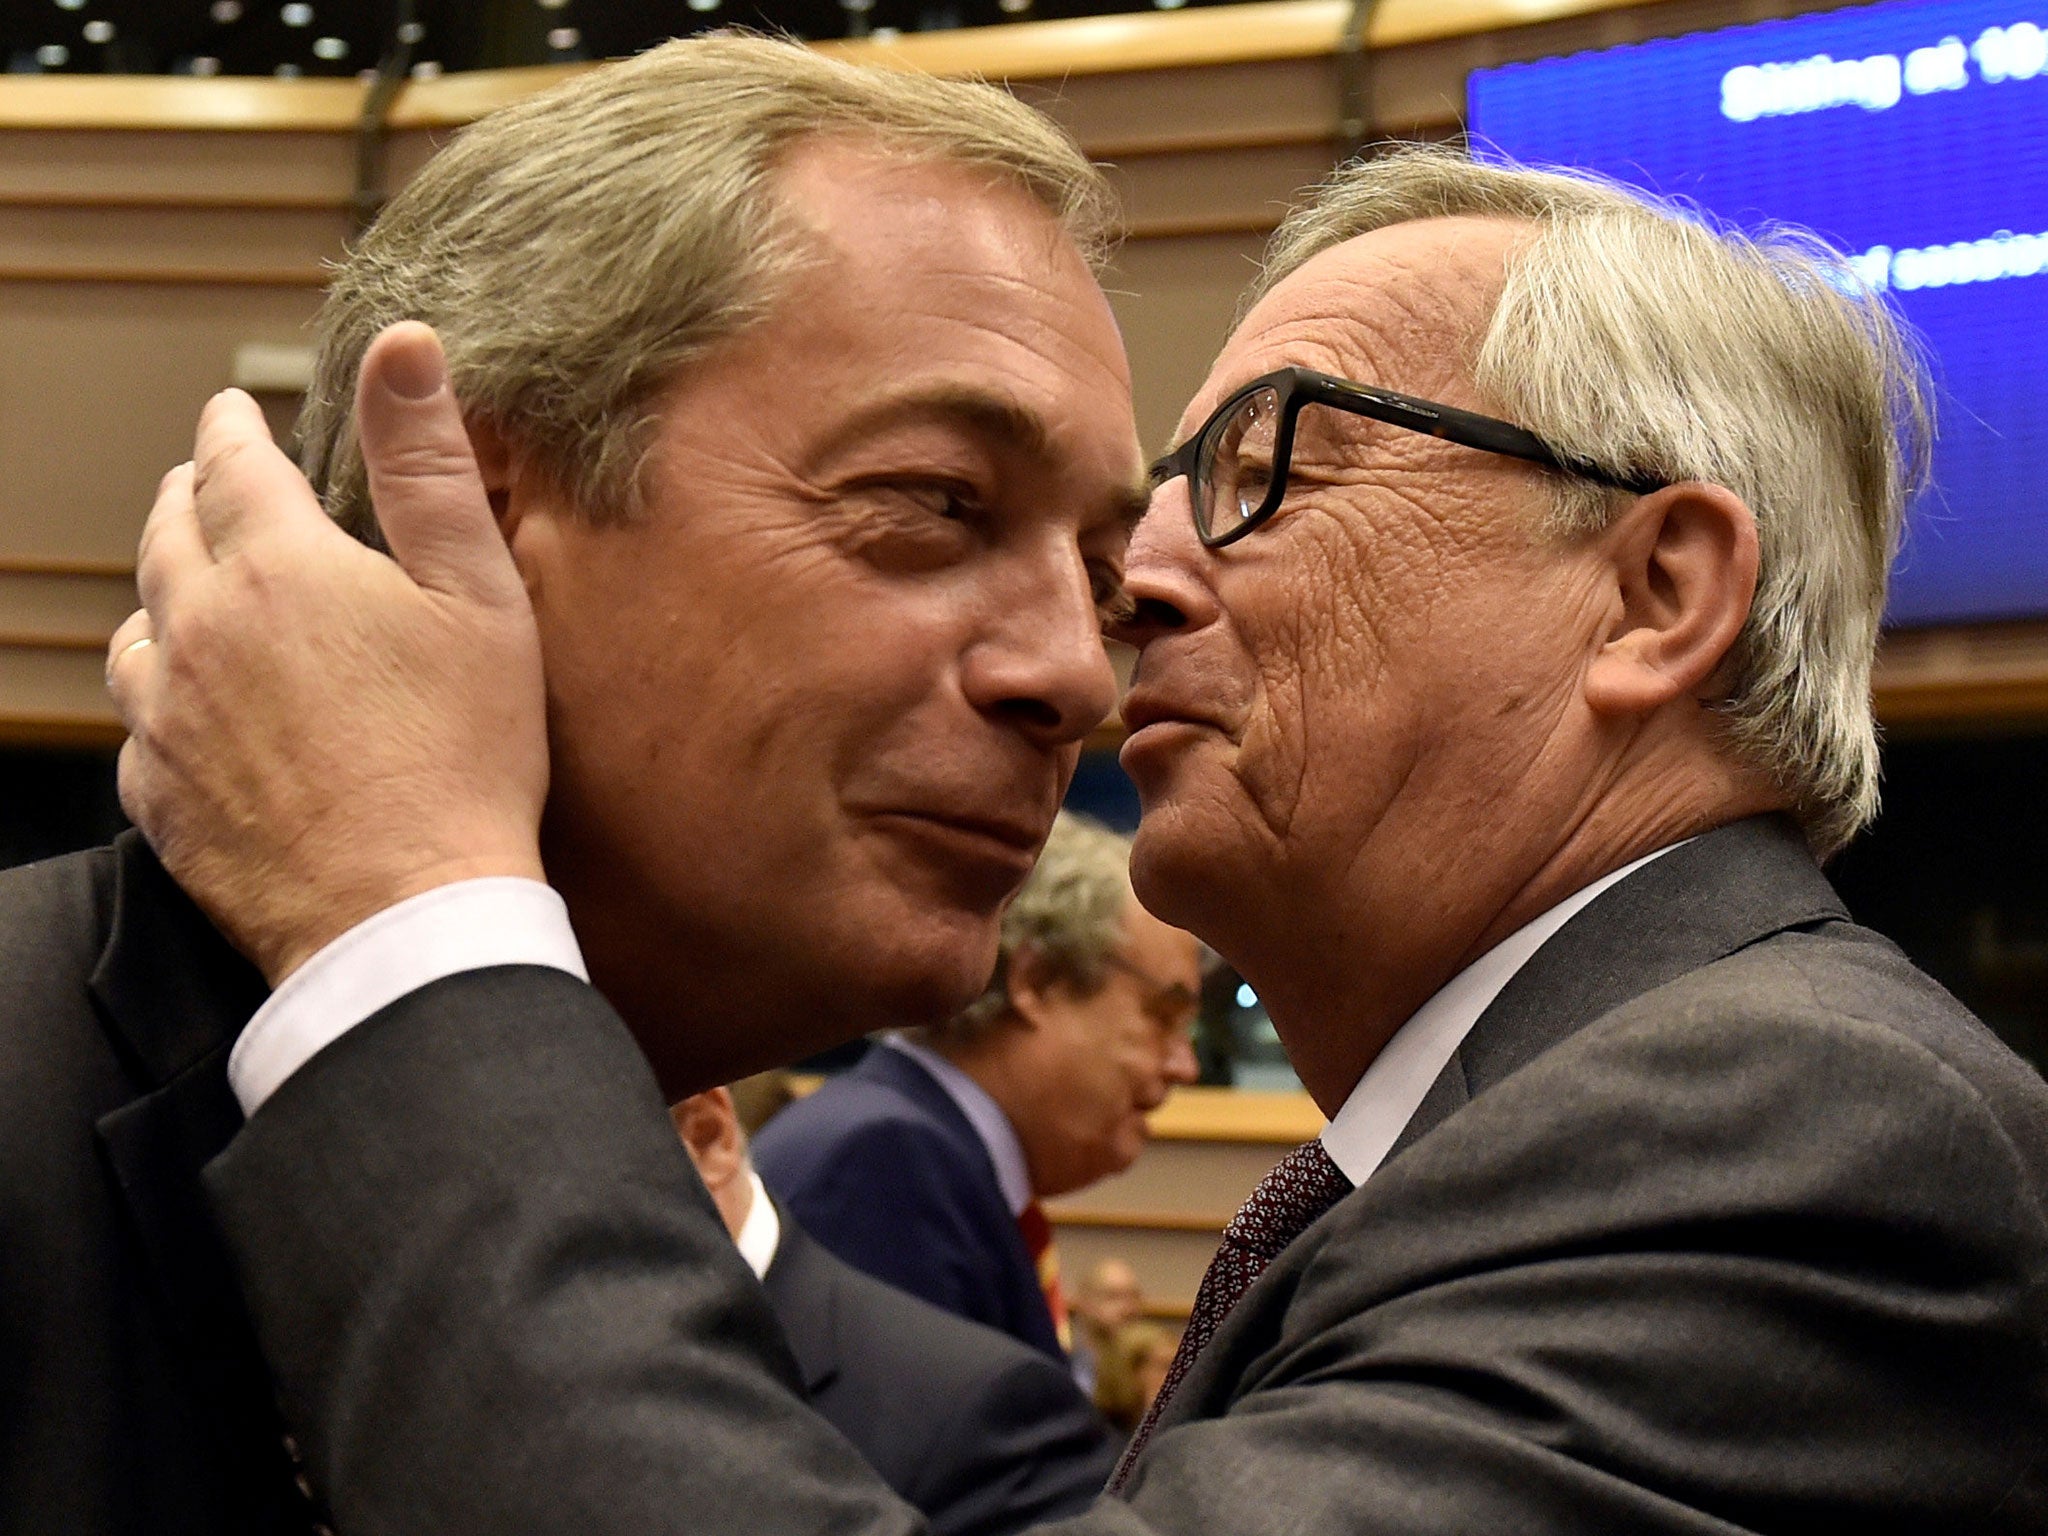 European Commission President Jean-Claude Juncker kisses Nigel Farage prior to a plenary session at the European Parliament on the outcome of the "Brexit" in Brussels, June 28, 2016.